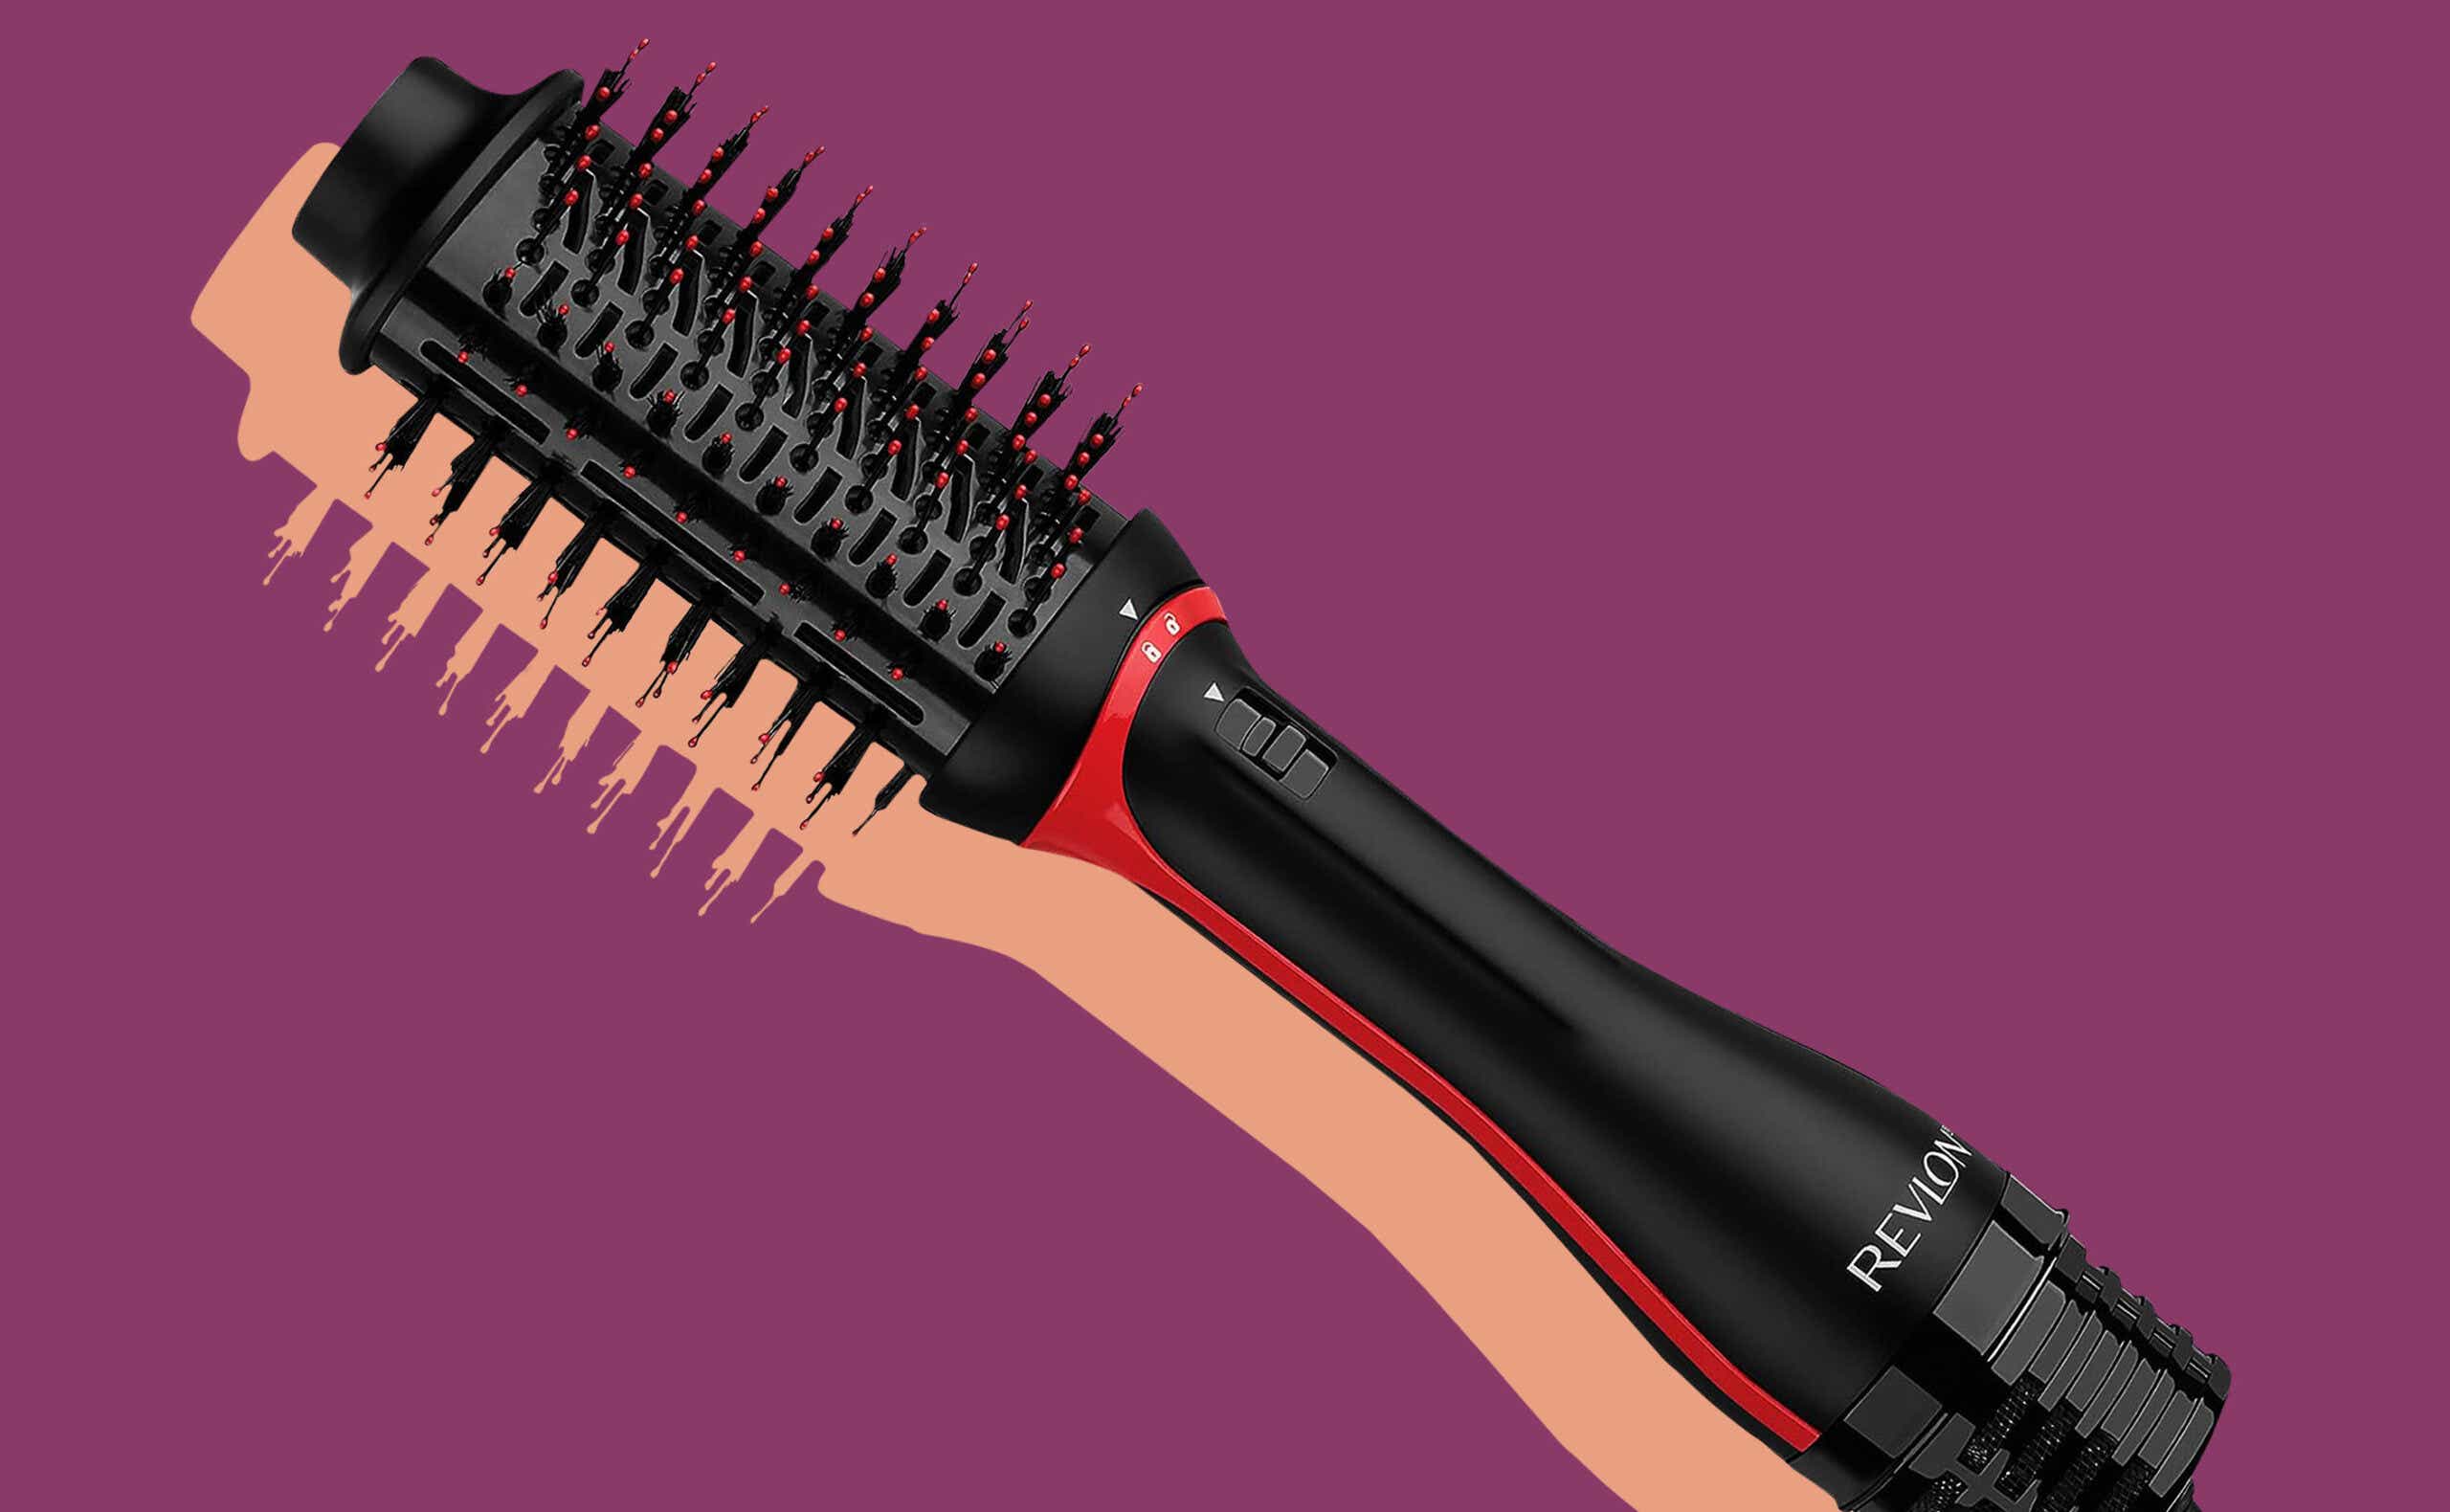 Which is actually better? Revlon One Step Blow Dryer vs Hot Air Kit 